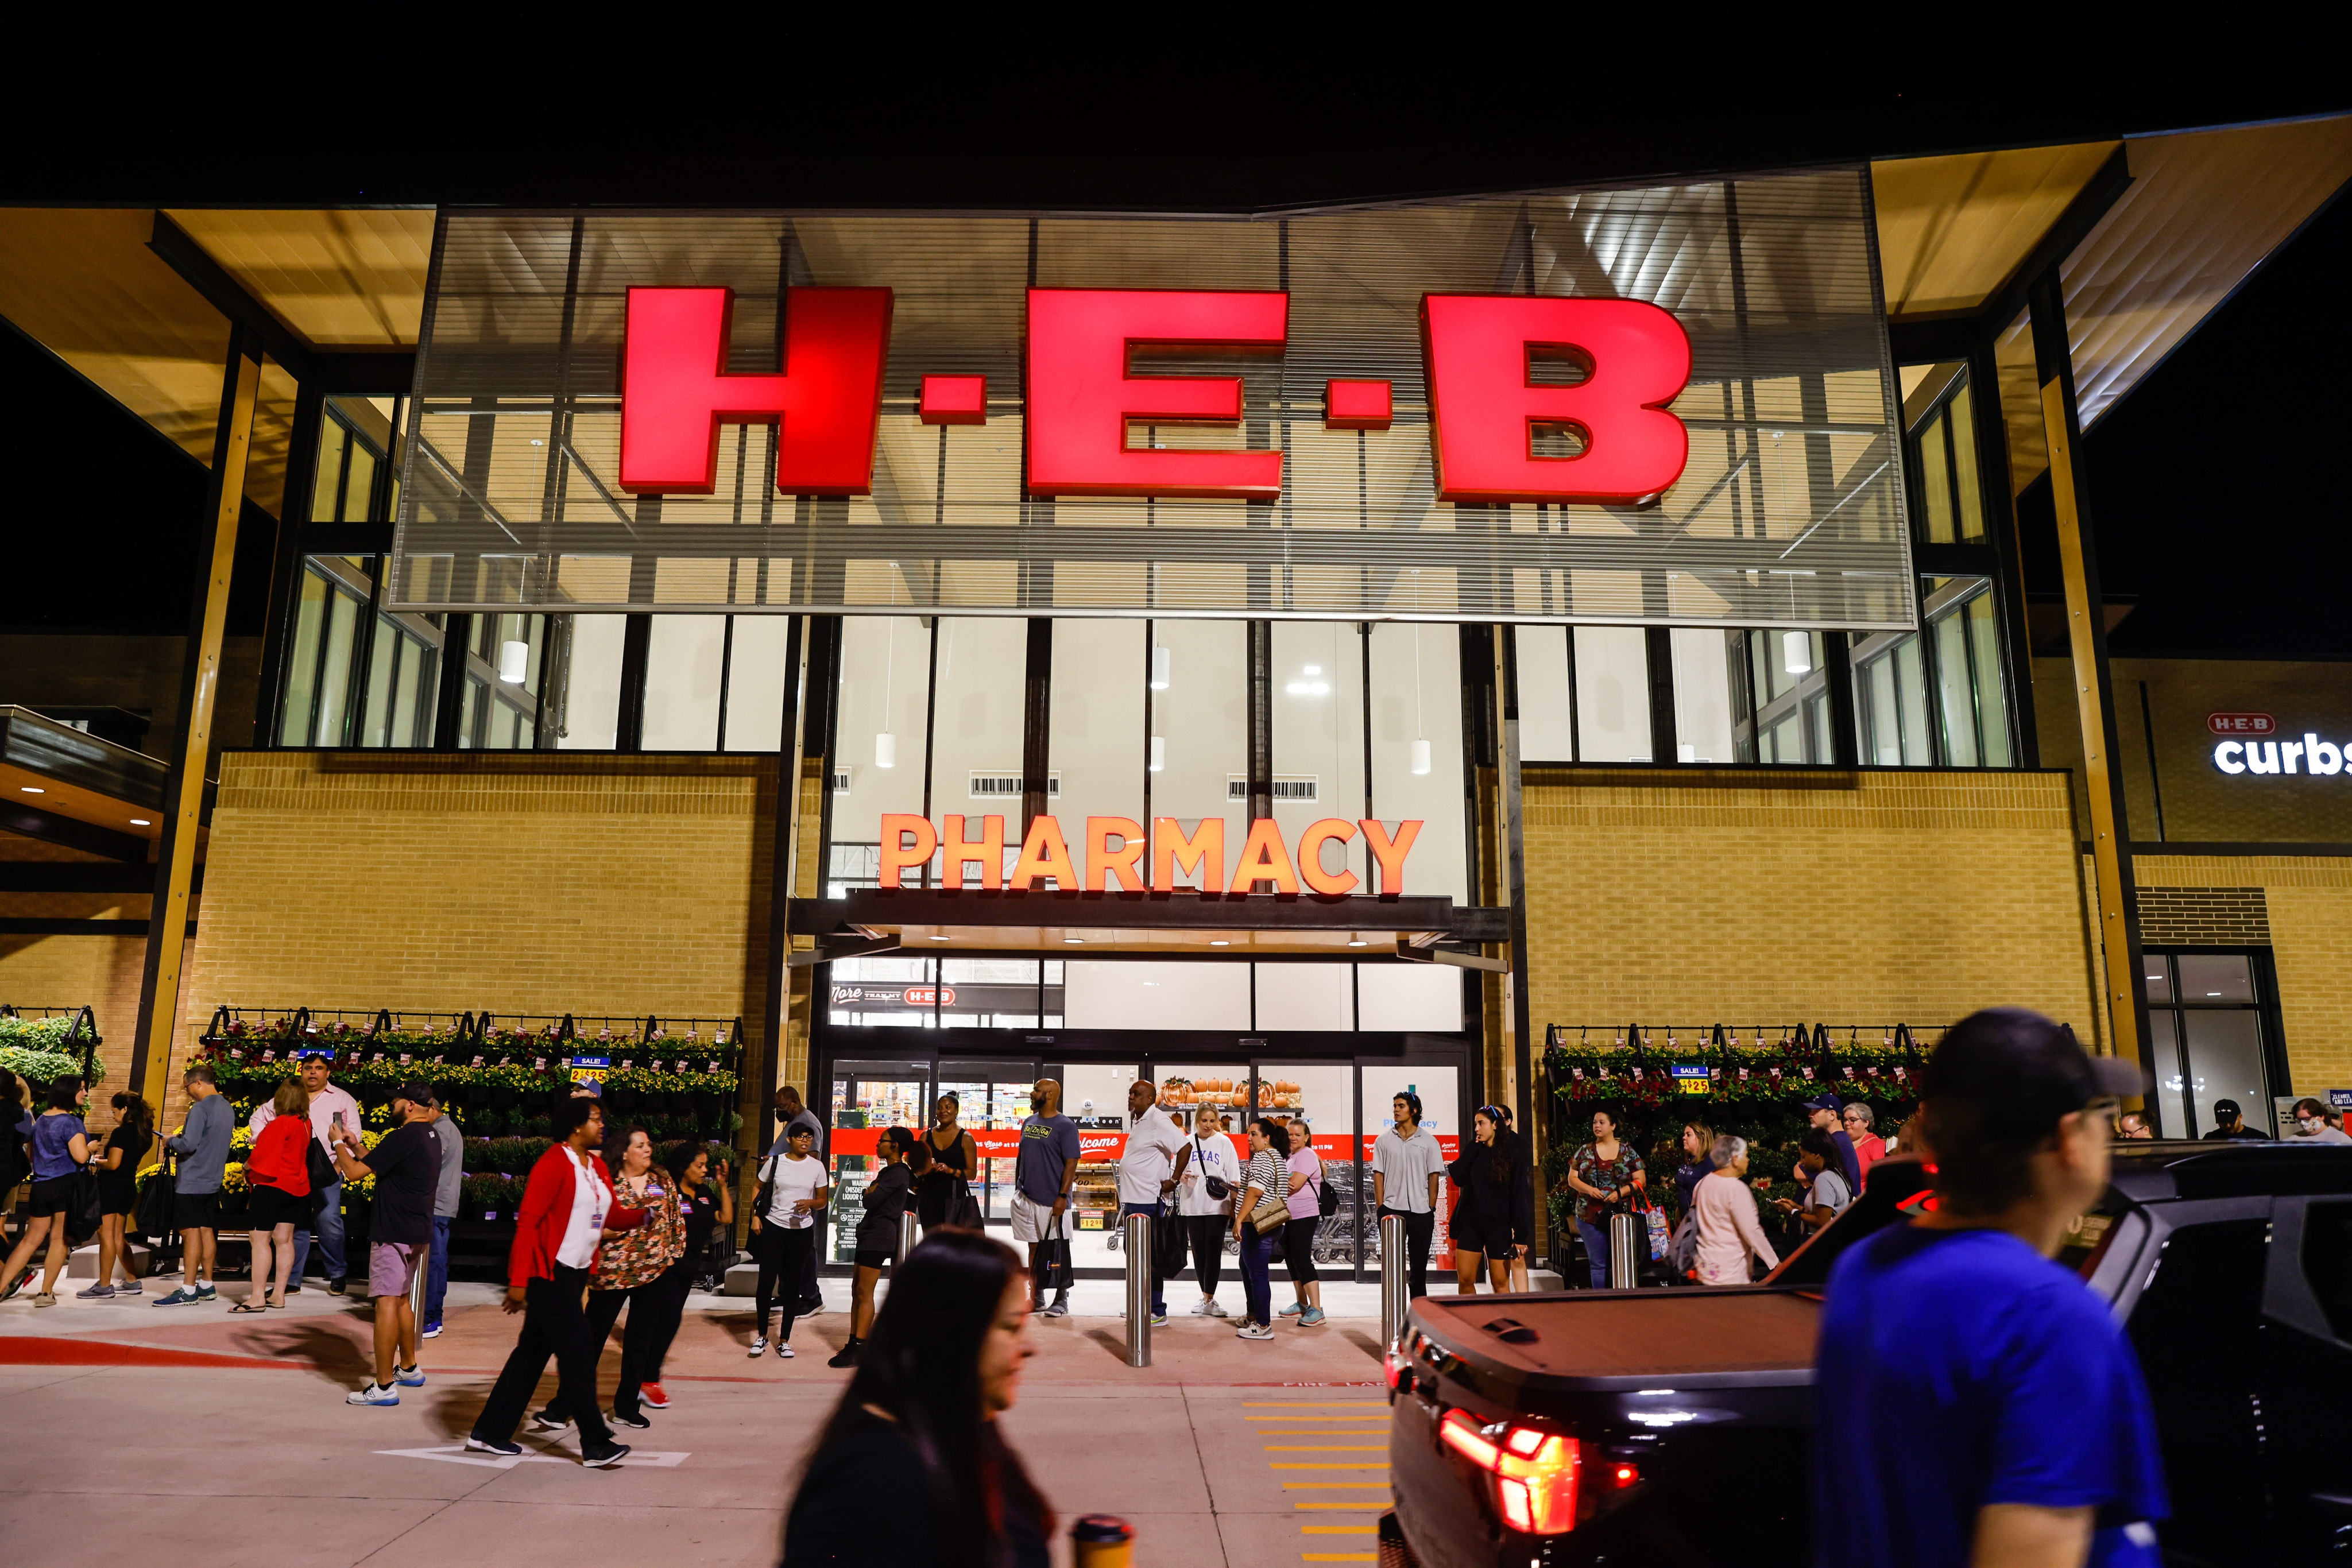 5 More Things to Buy at H-E-B Now Open in Plano and P.S. The Lines